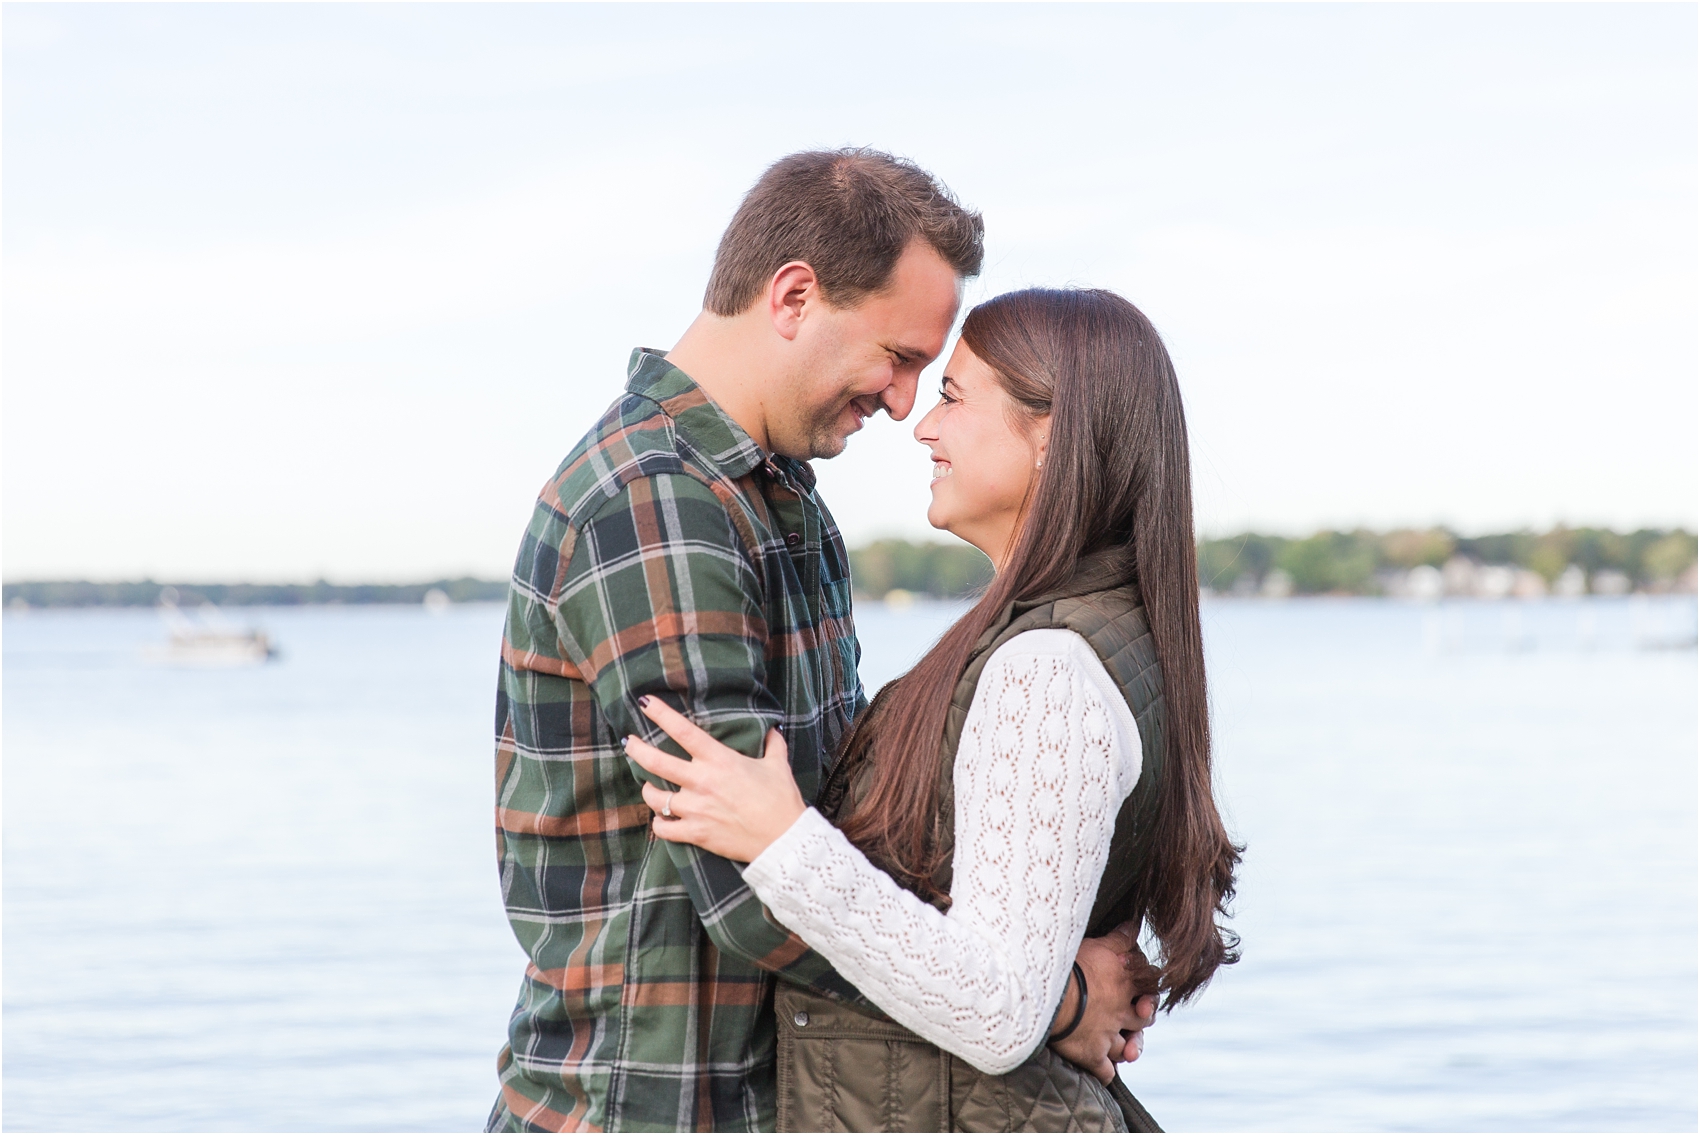 relaxed-autumn-engagement-photos-at-hudson-mills-metropark-in-dexter-mi-by-courtney-carolyn-photography_0014.jpg